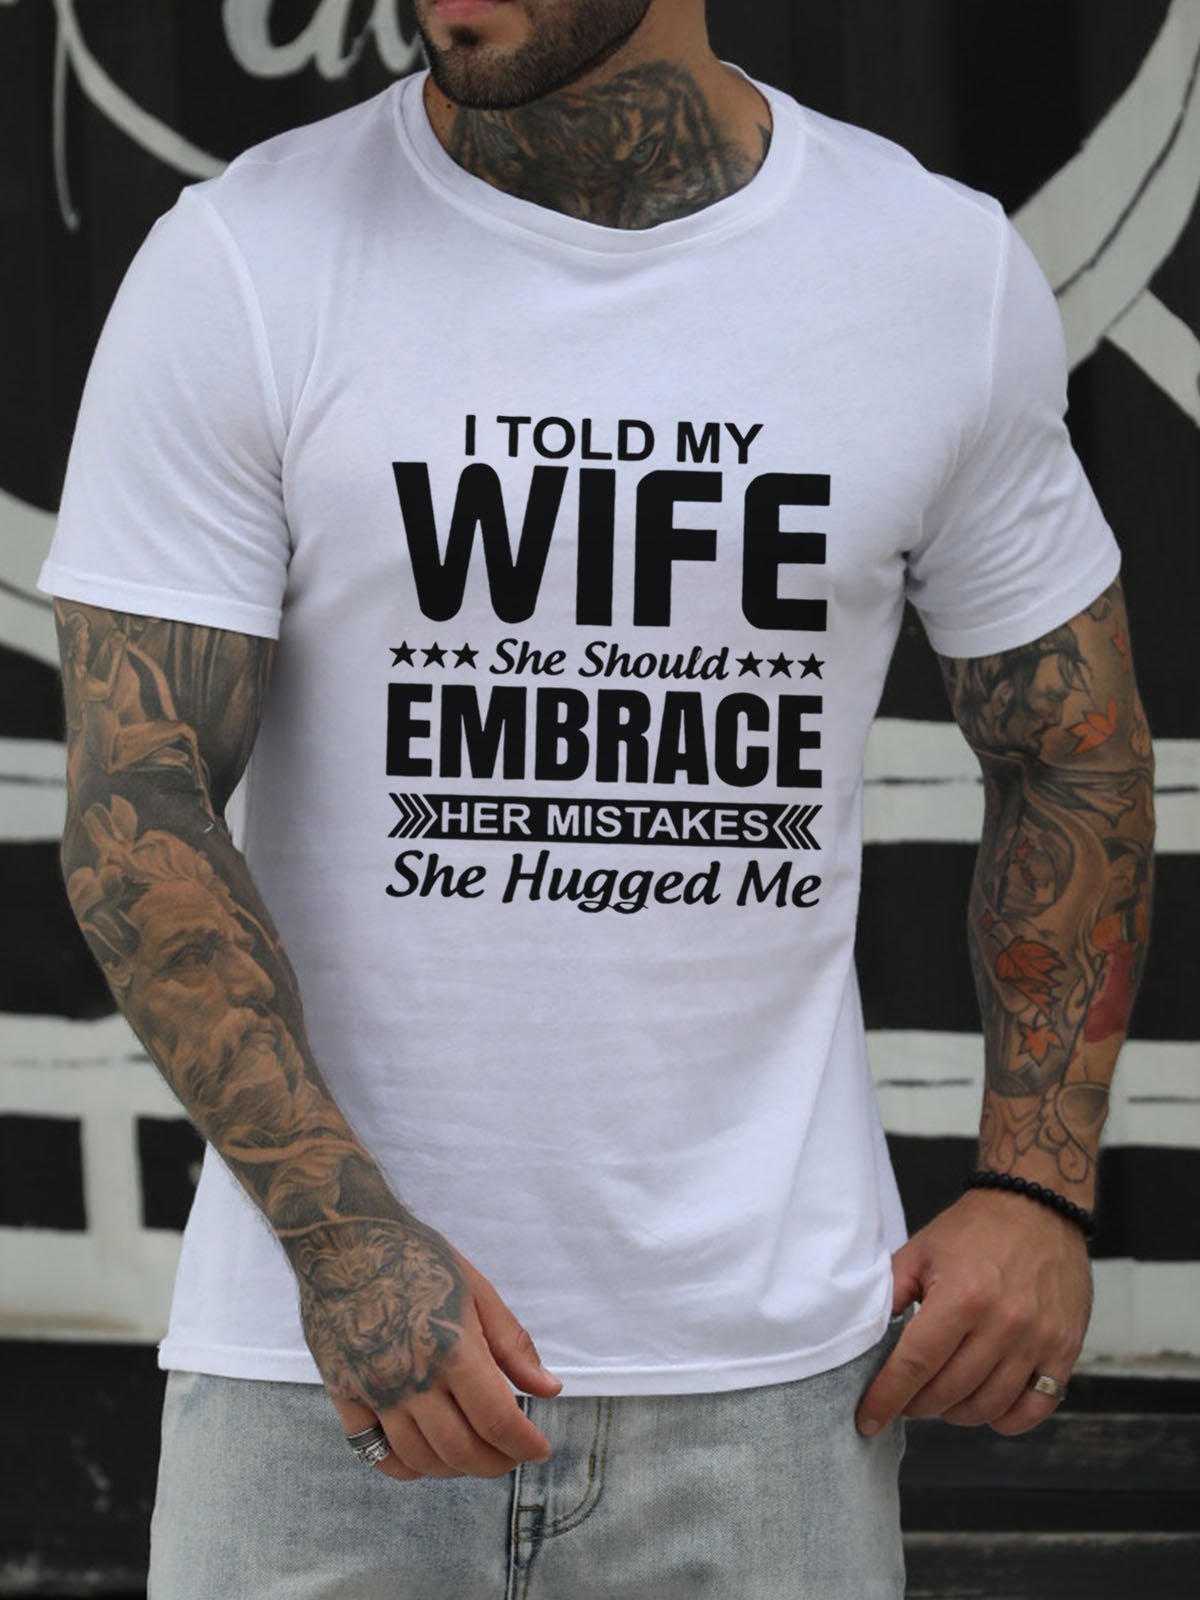 I Told My Wife She Should Embrace Her Mistakes She Hugged Me Cotton Blends Casual Short Sleeve Letter Shirt & Top